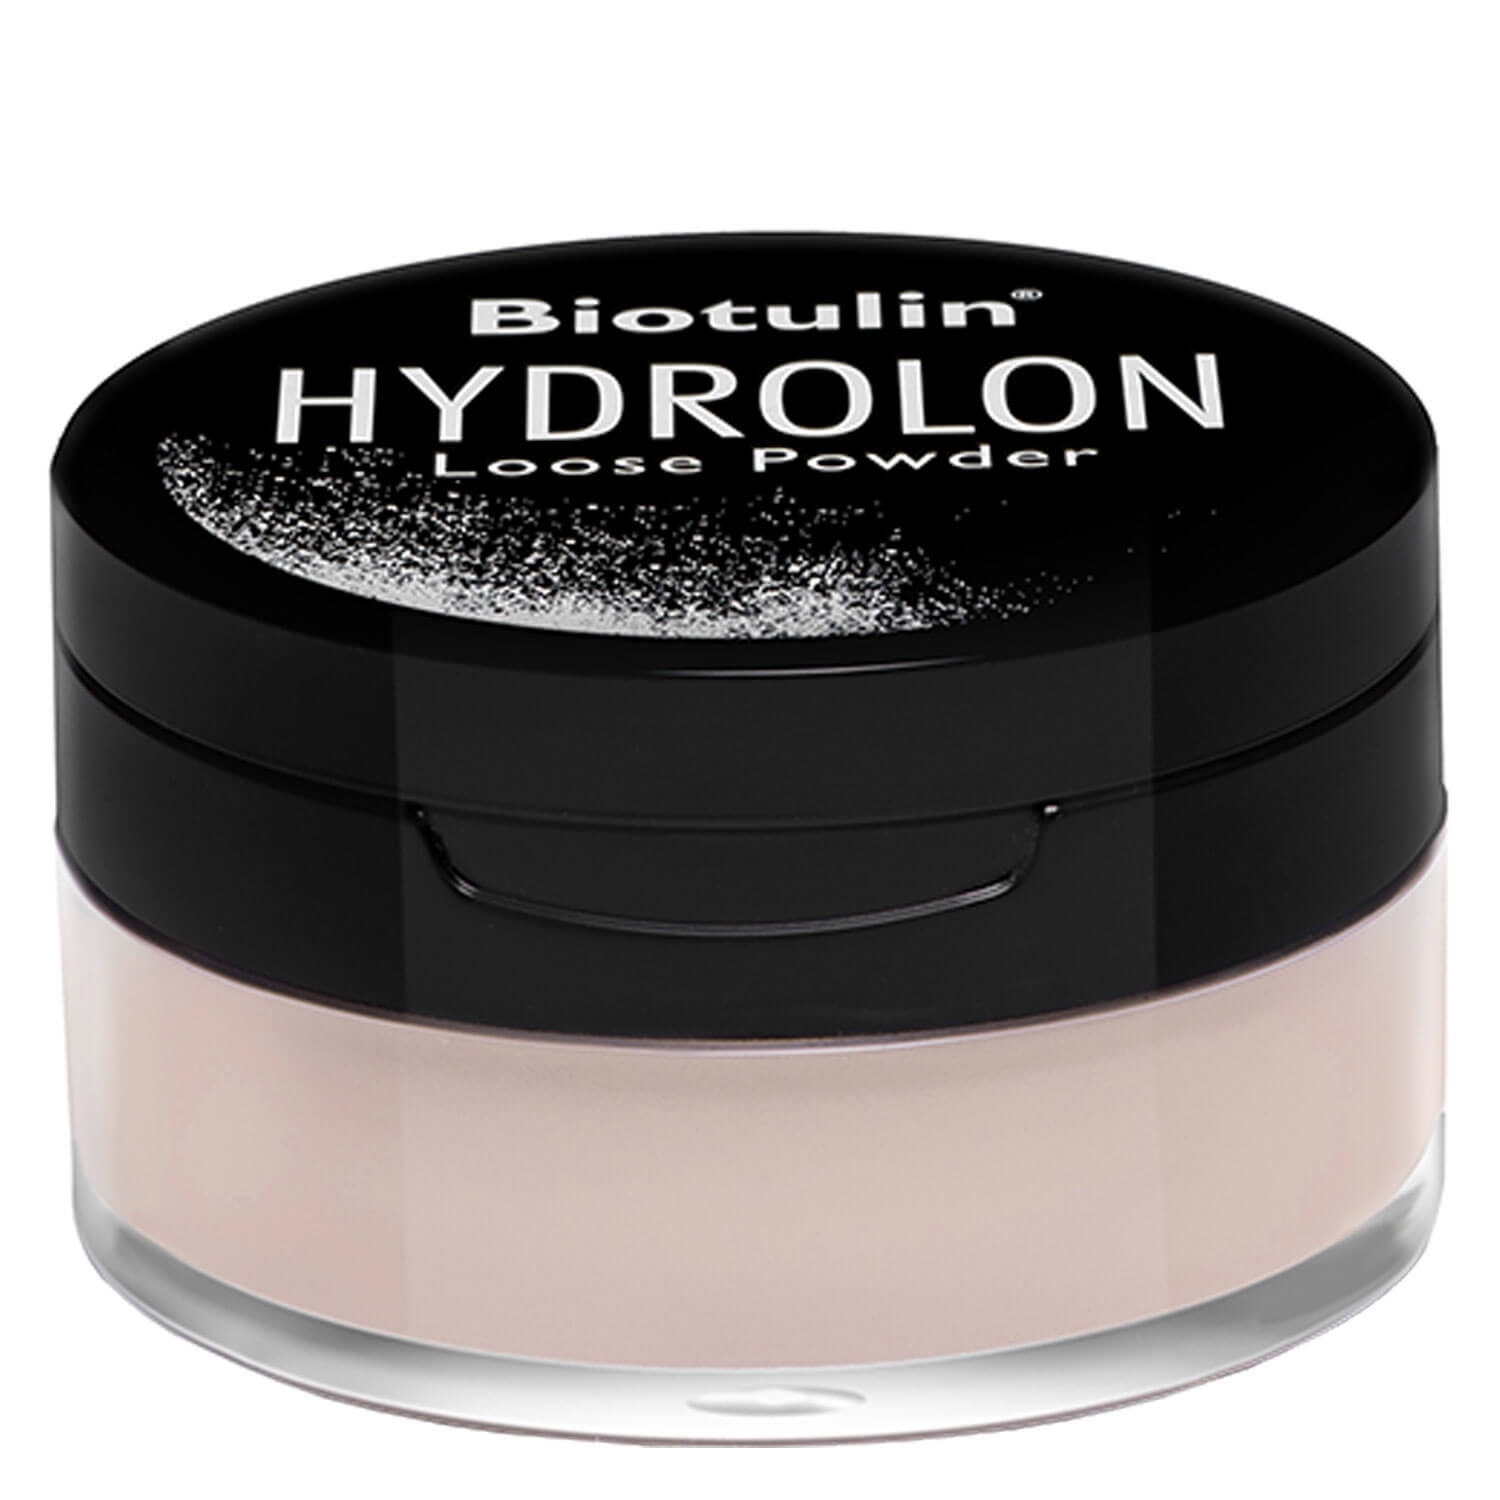 Product image from Biotulin - Hydrolon Loose Powder